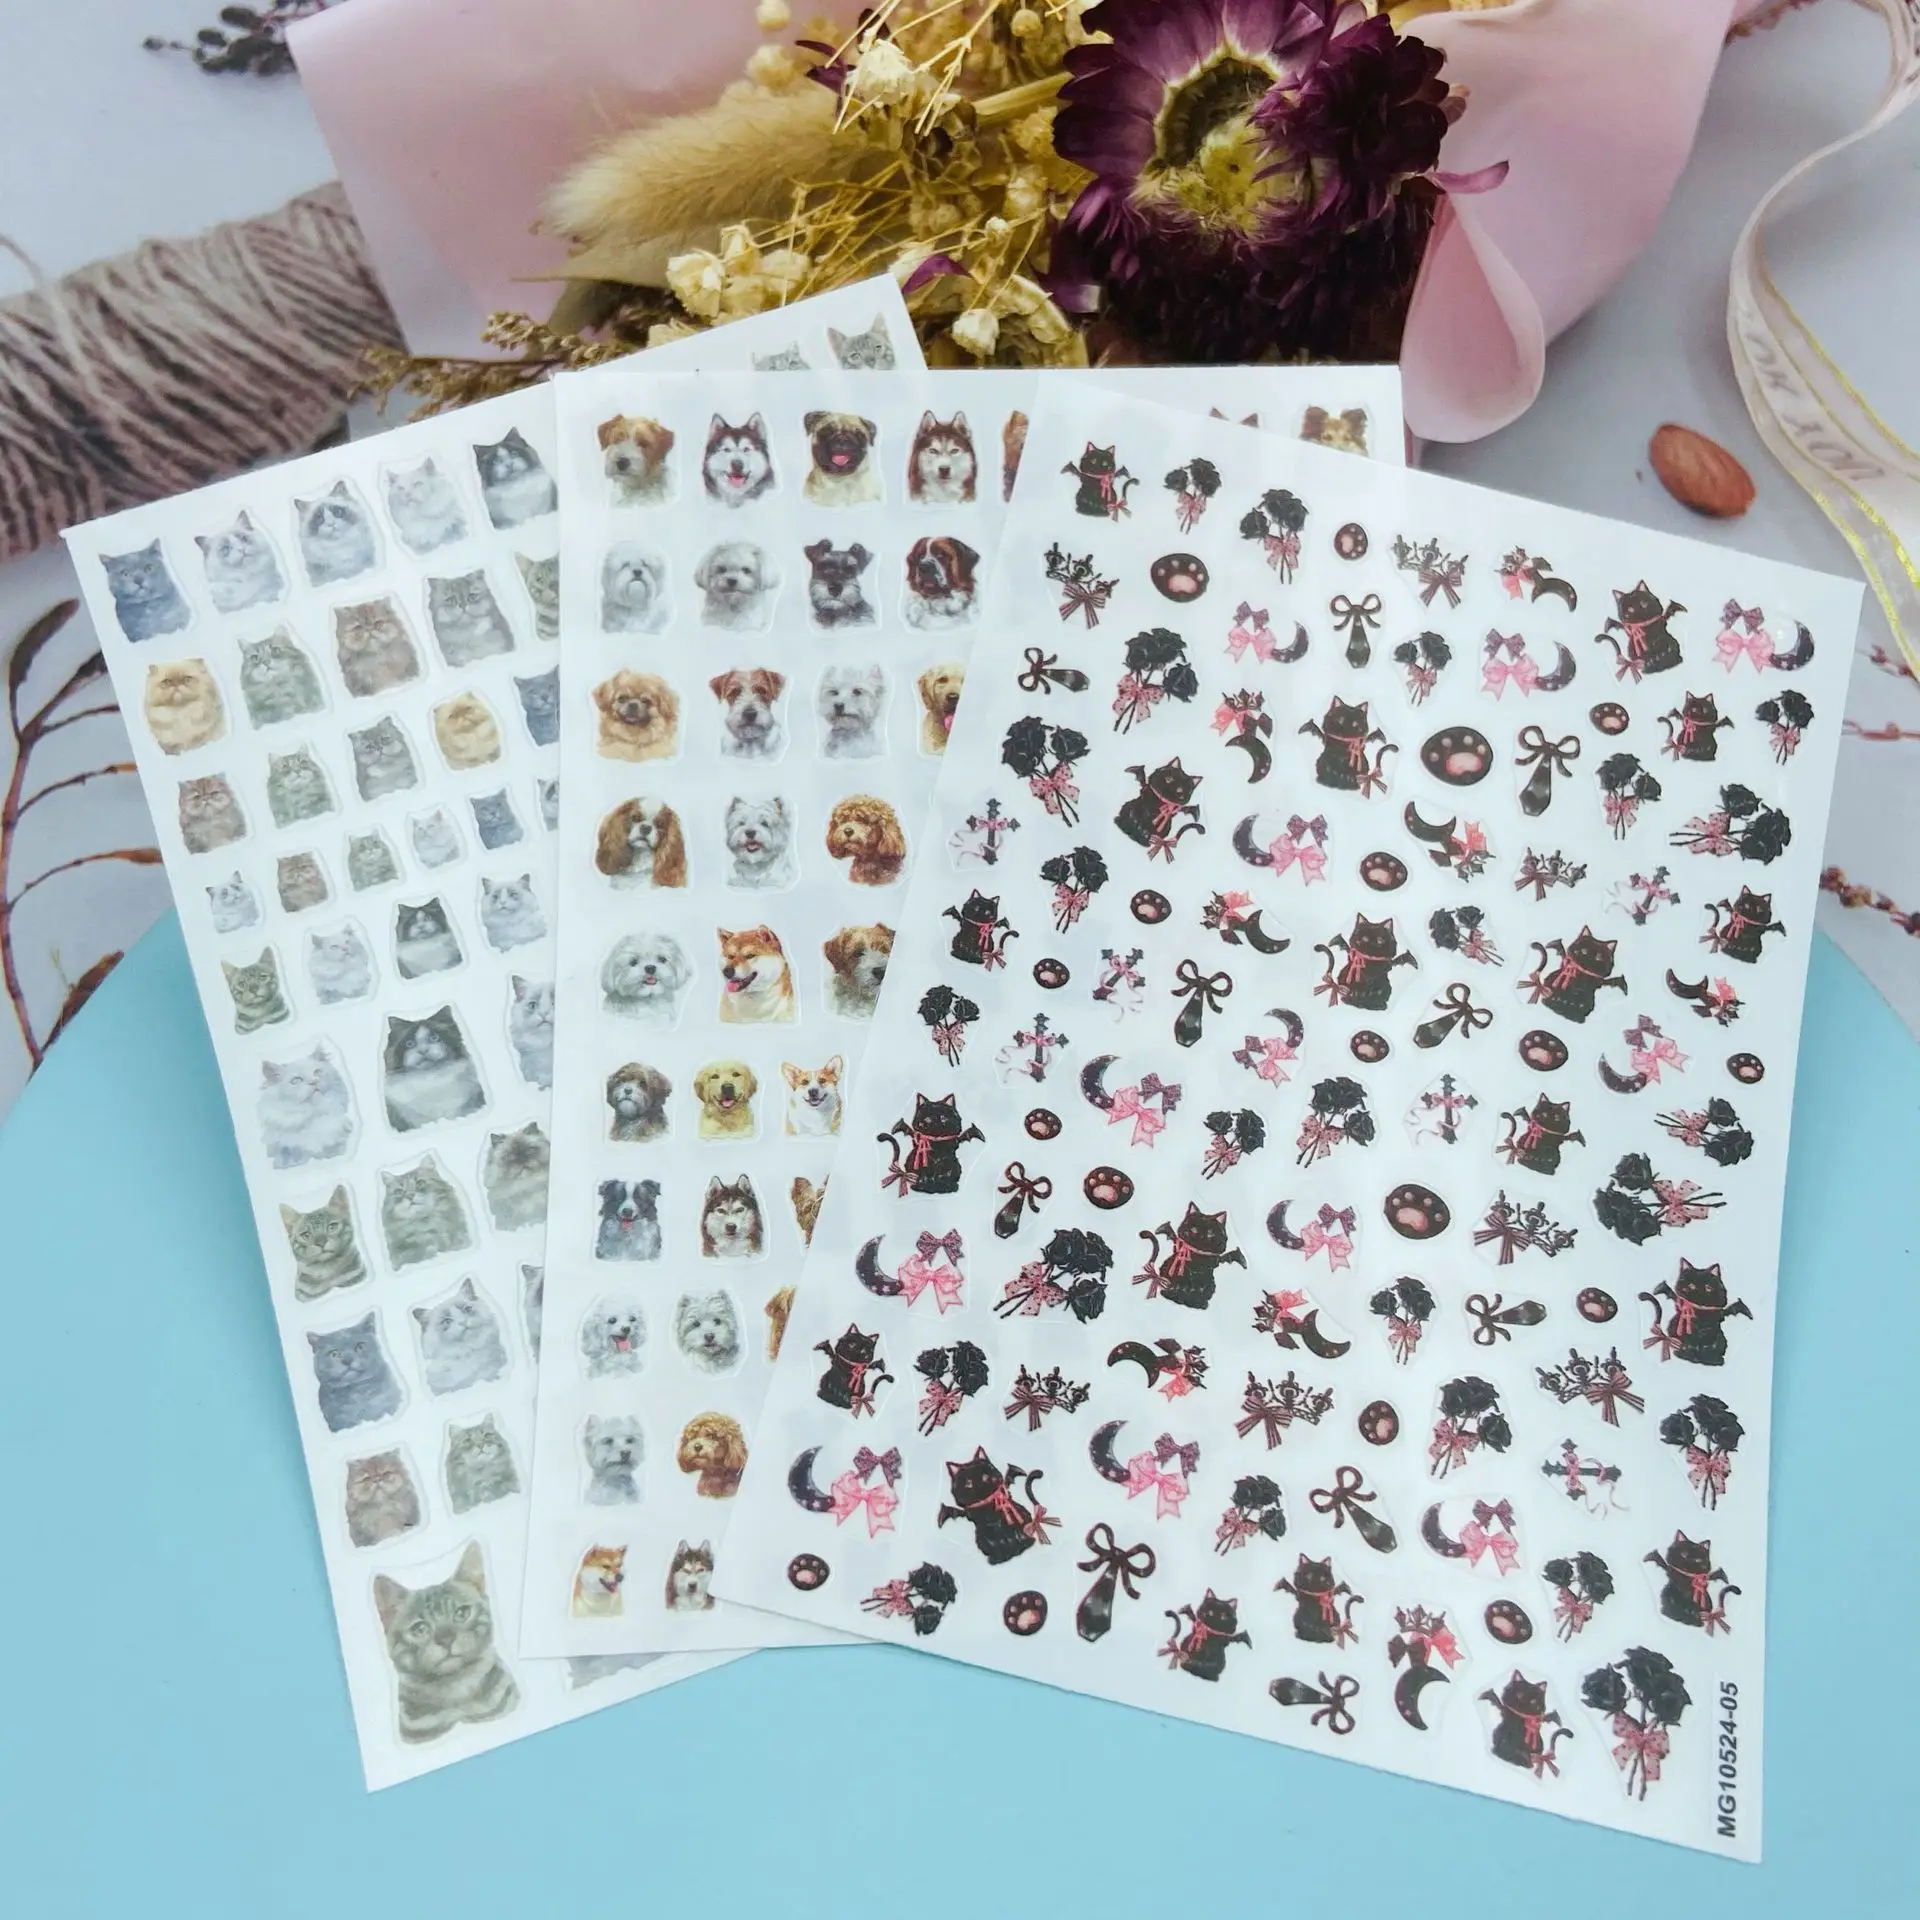 

New Kitten and Puppy Pattern Nail Sticker Self-adhesive Transfer Decal 3D Slider DIY Tips Nail Art Decorations Manicure Package